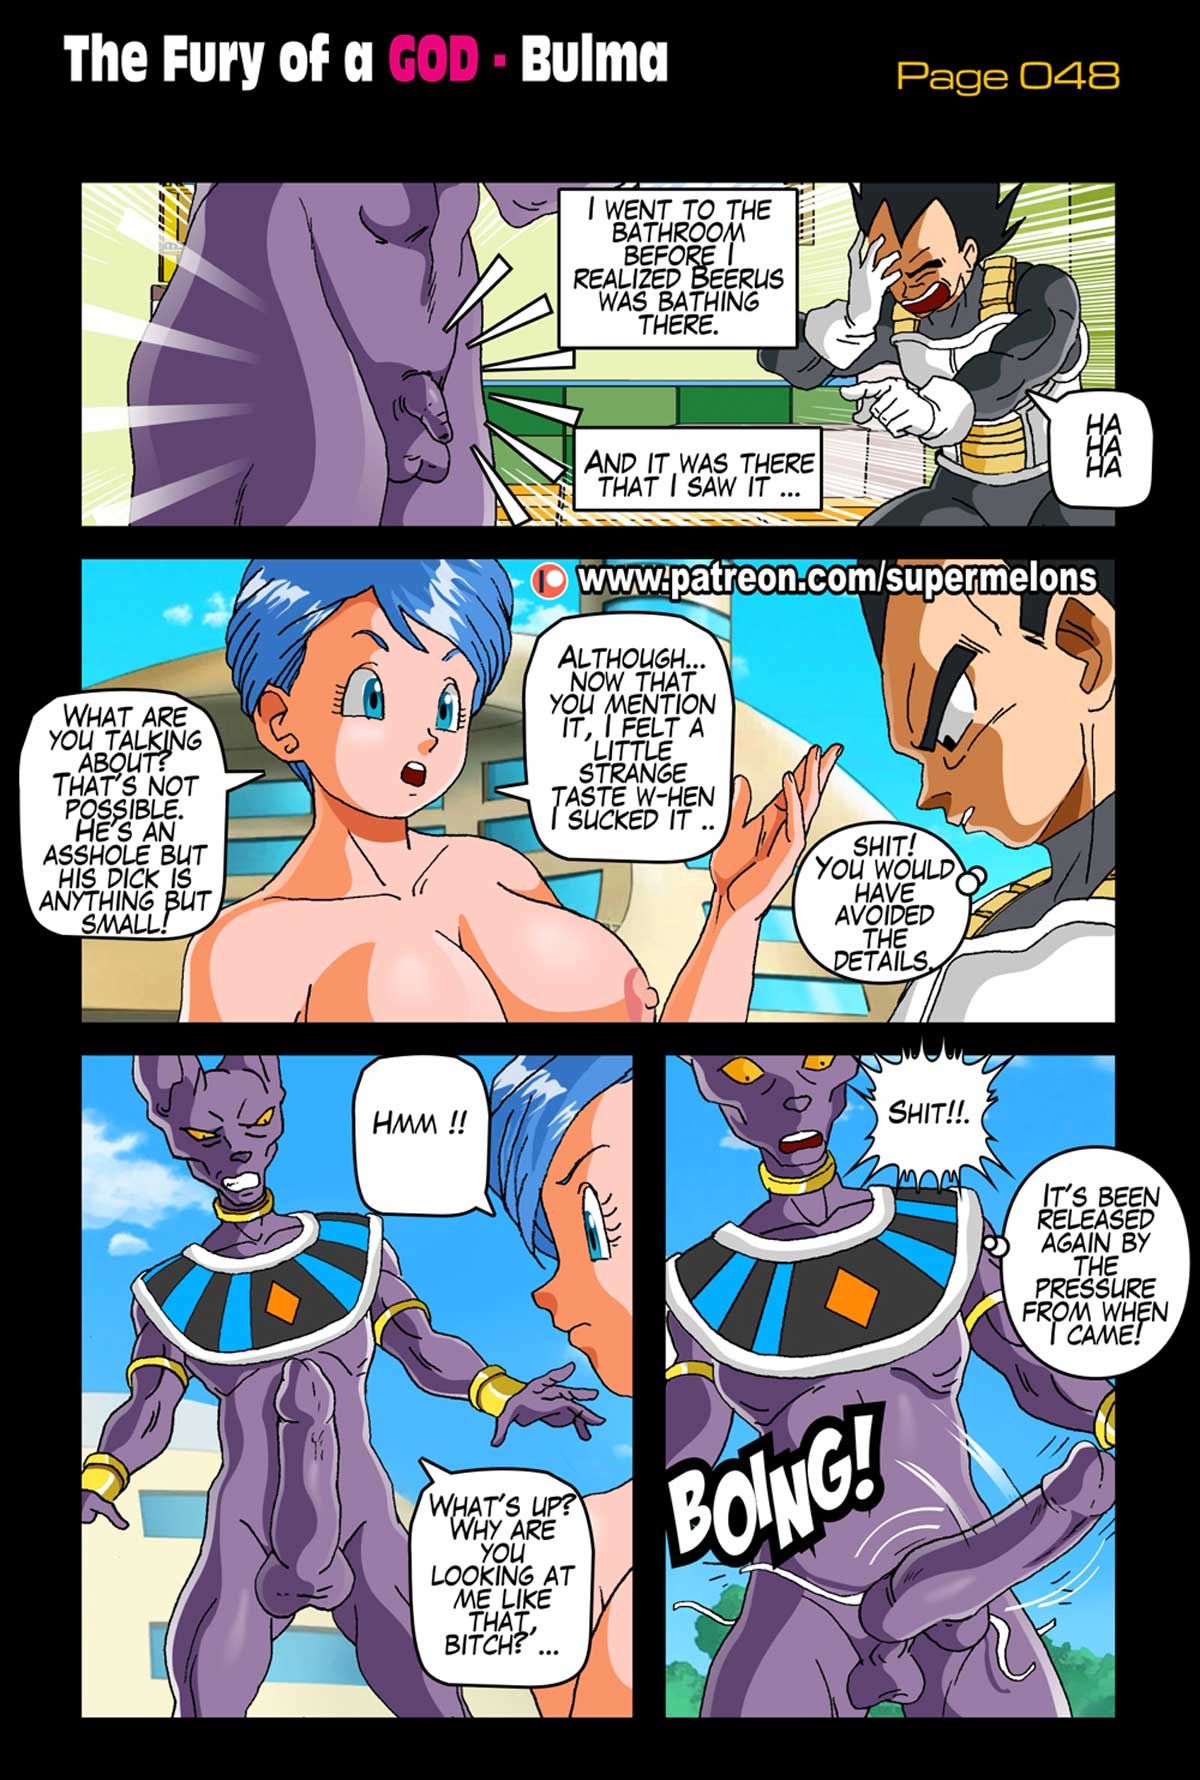 [Super Melons] The Fury of a God (Dragon Ball Super) [Ongoing] 52